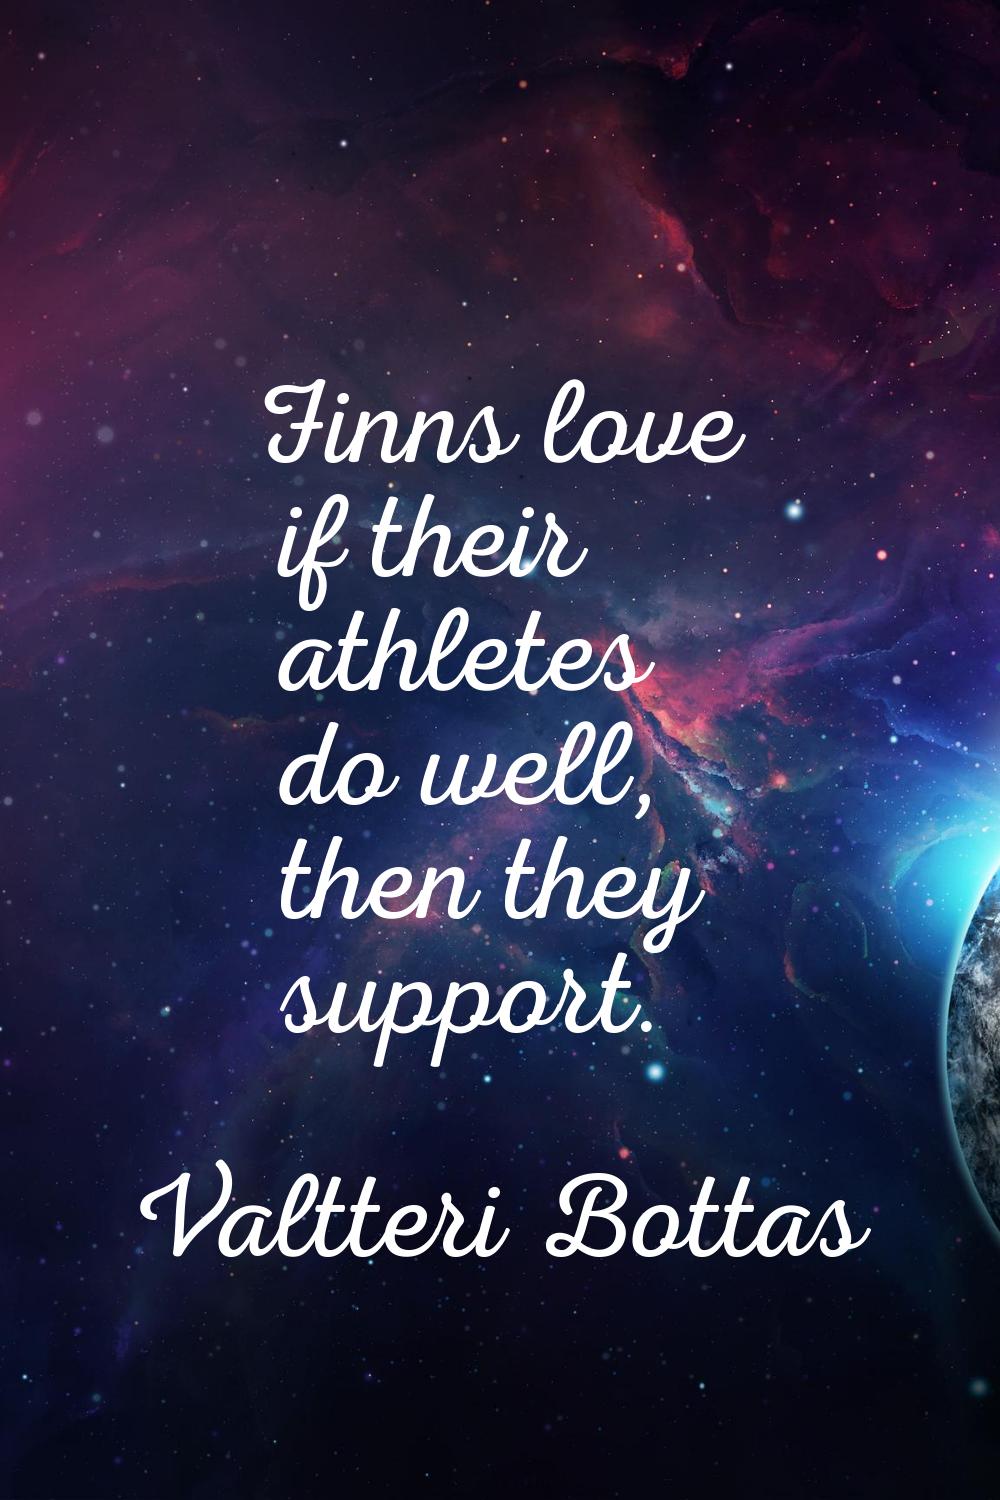 Finns love if their athletes do well, then they support.